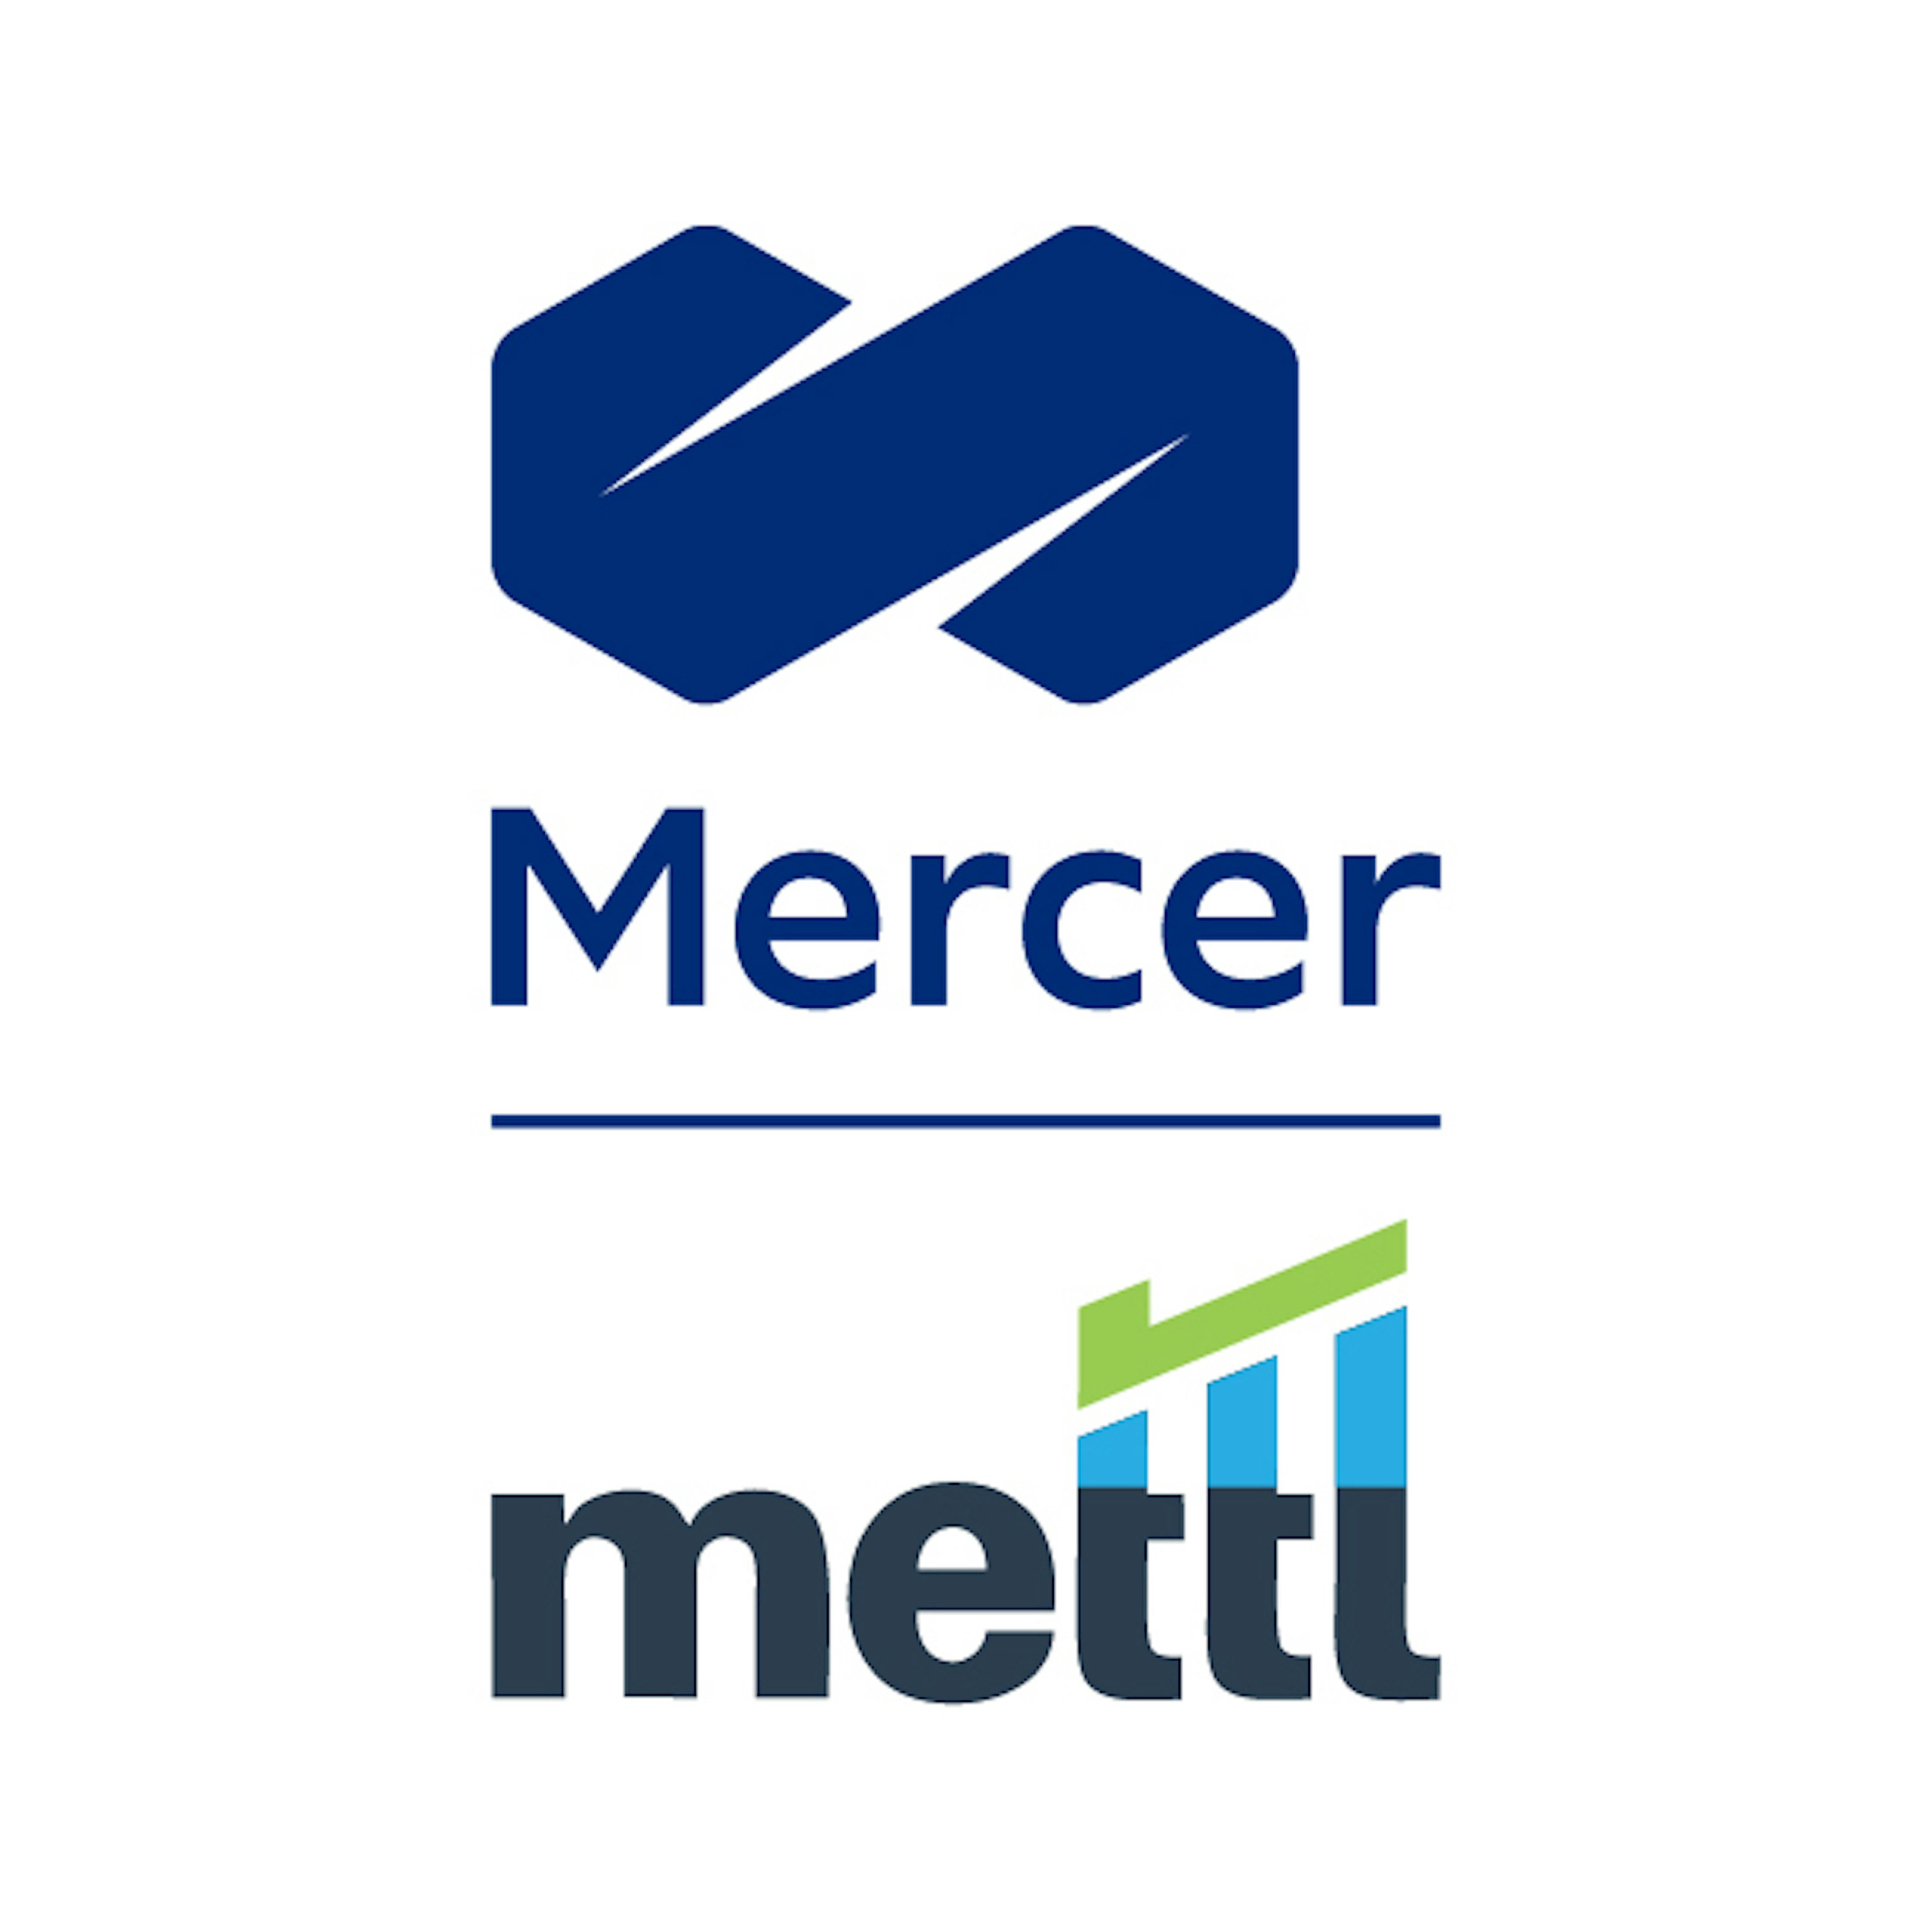 mercer-mettl-online-examination-and-proctoring-solutions-pricing-features-reviews